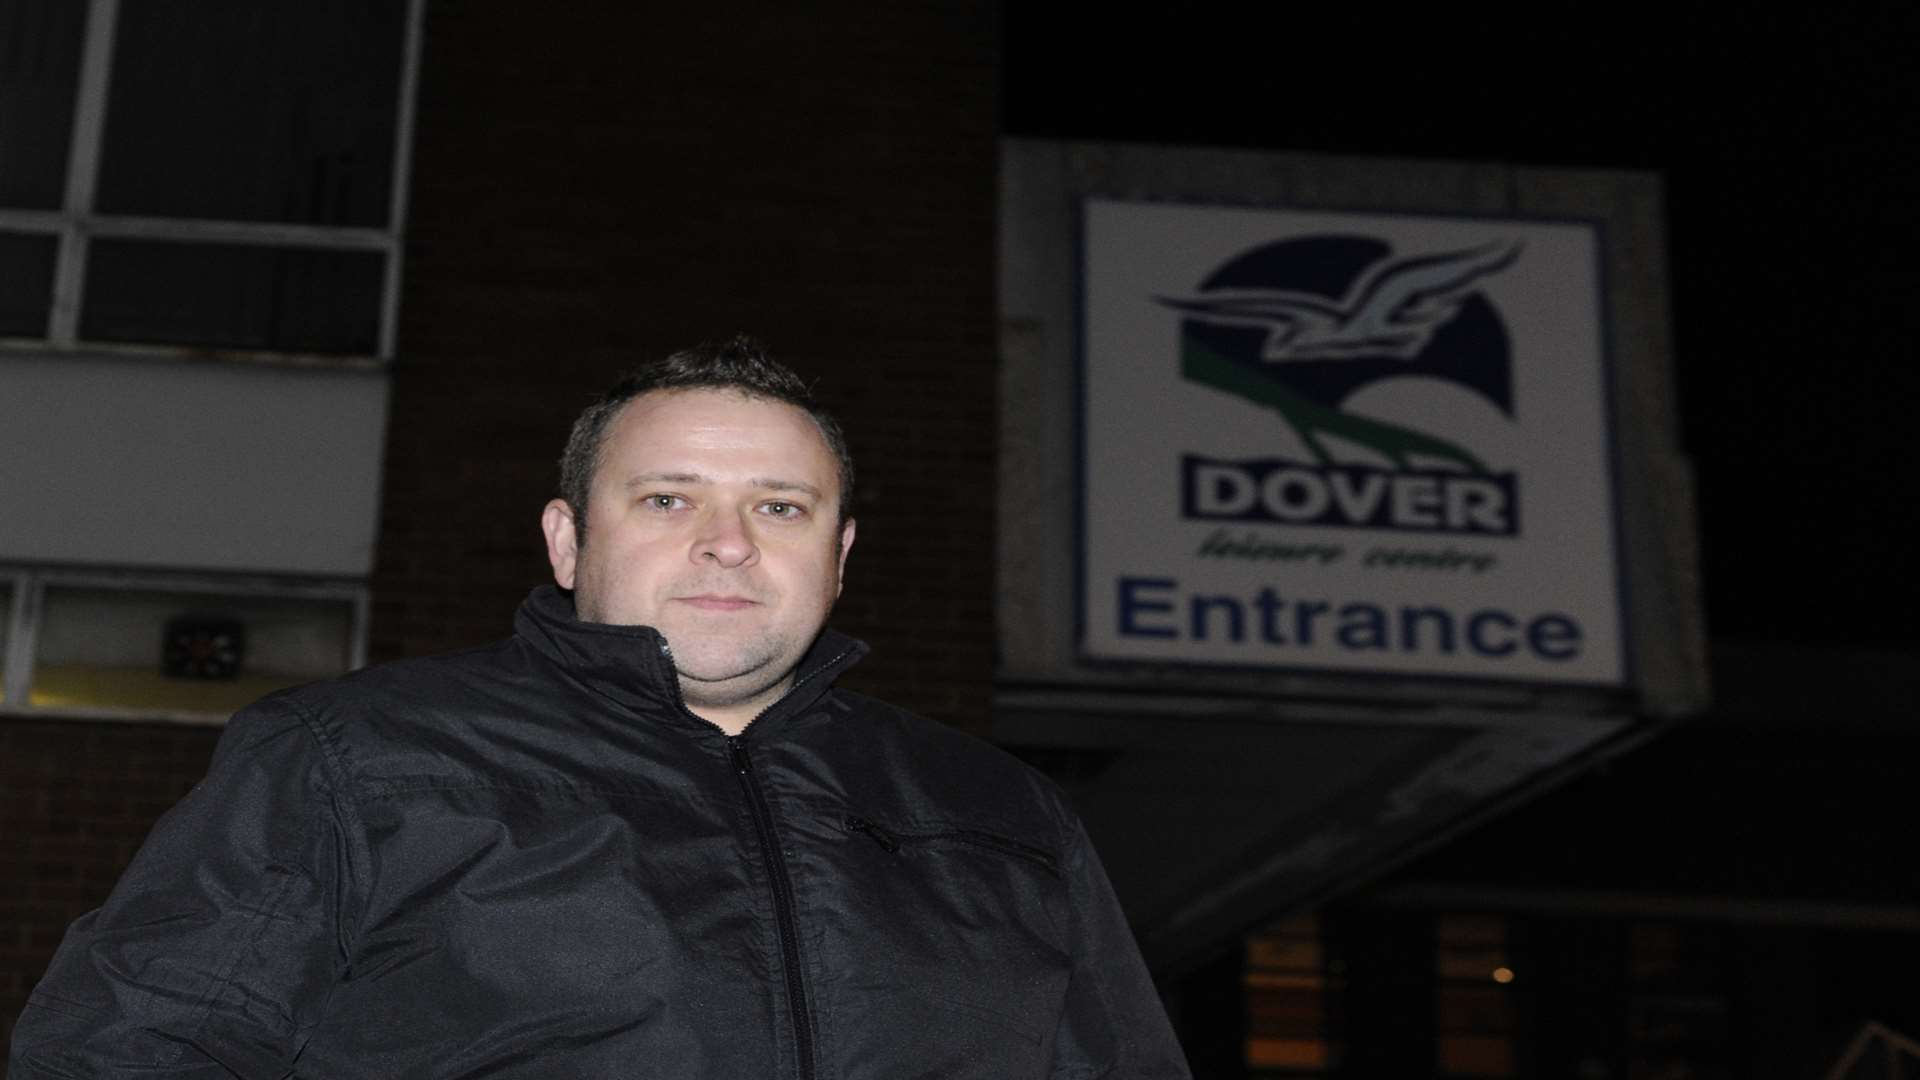 Peter Ward pictured outside Dover Leisure Centre